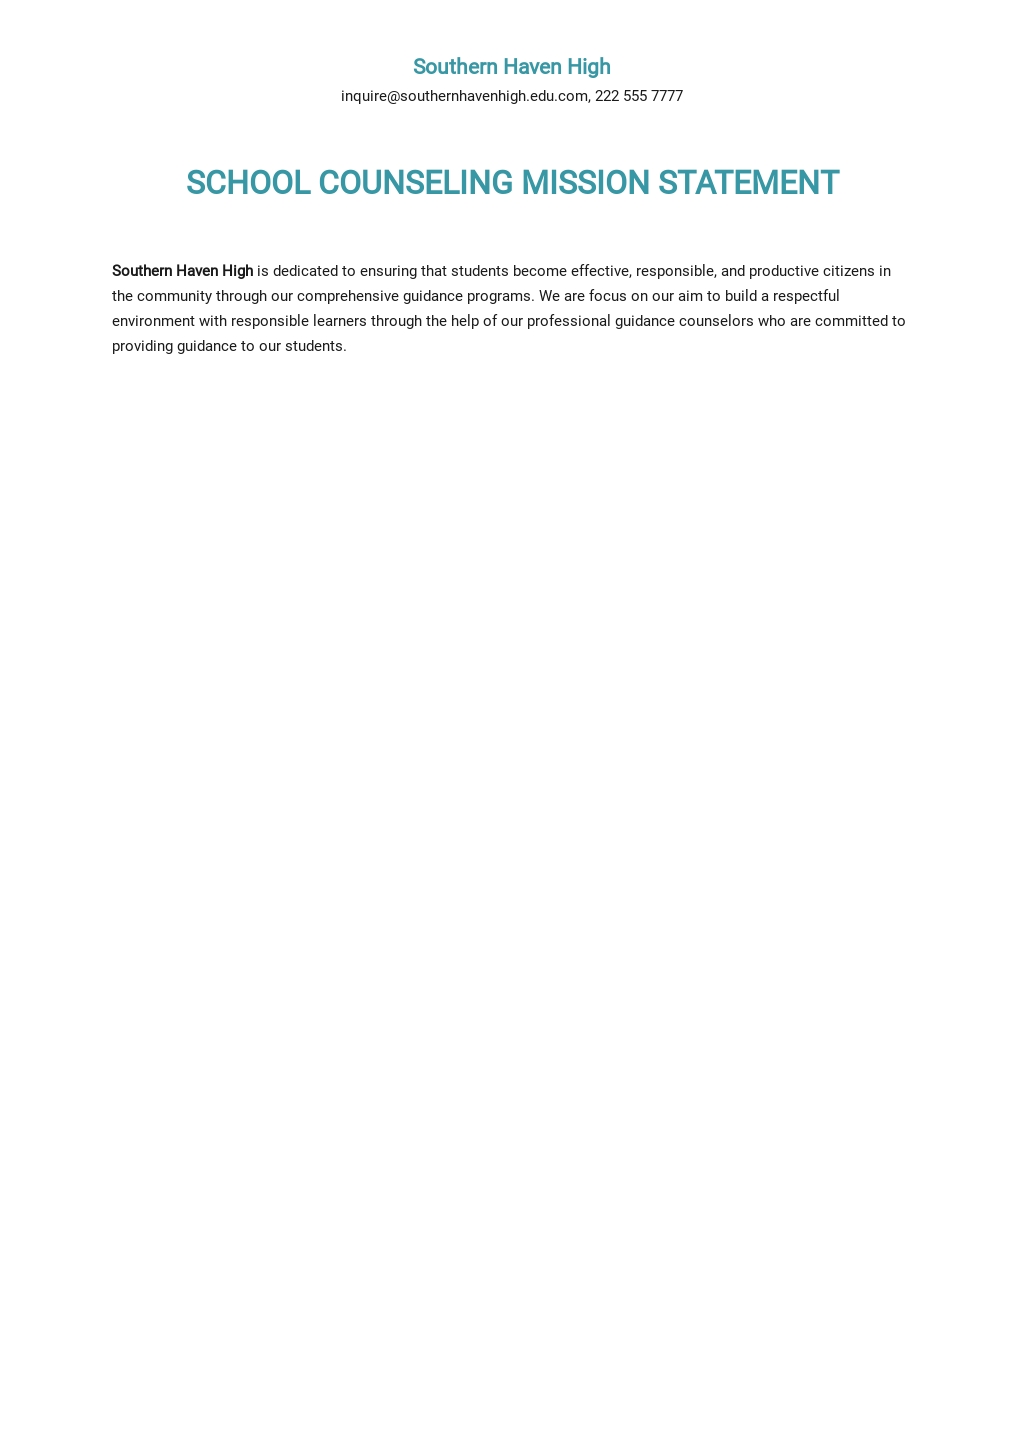 Sample School Counseling Mission Statement Template.jpe